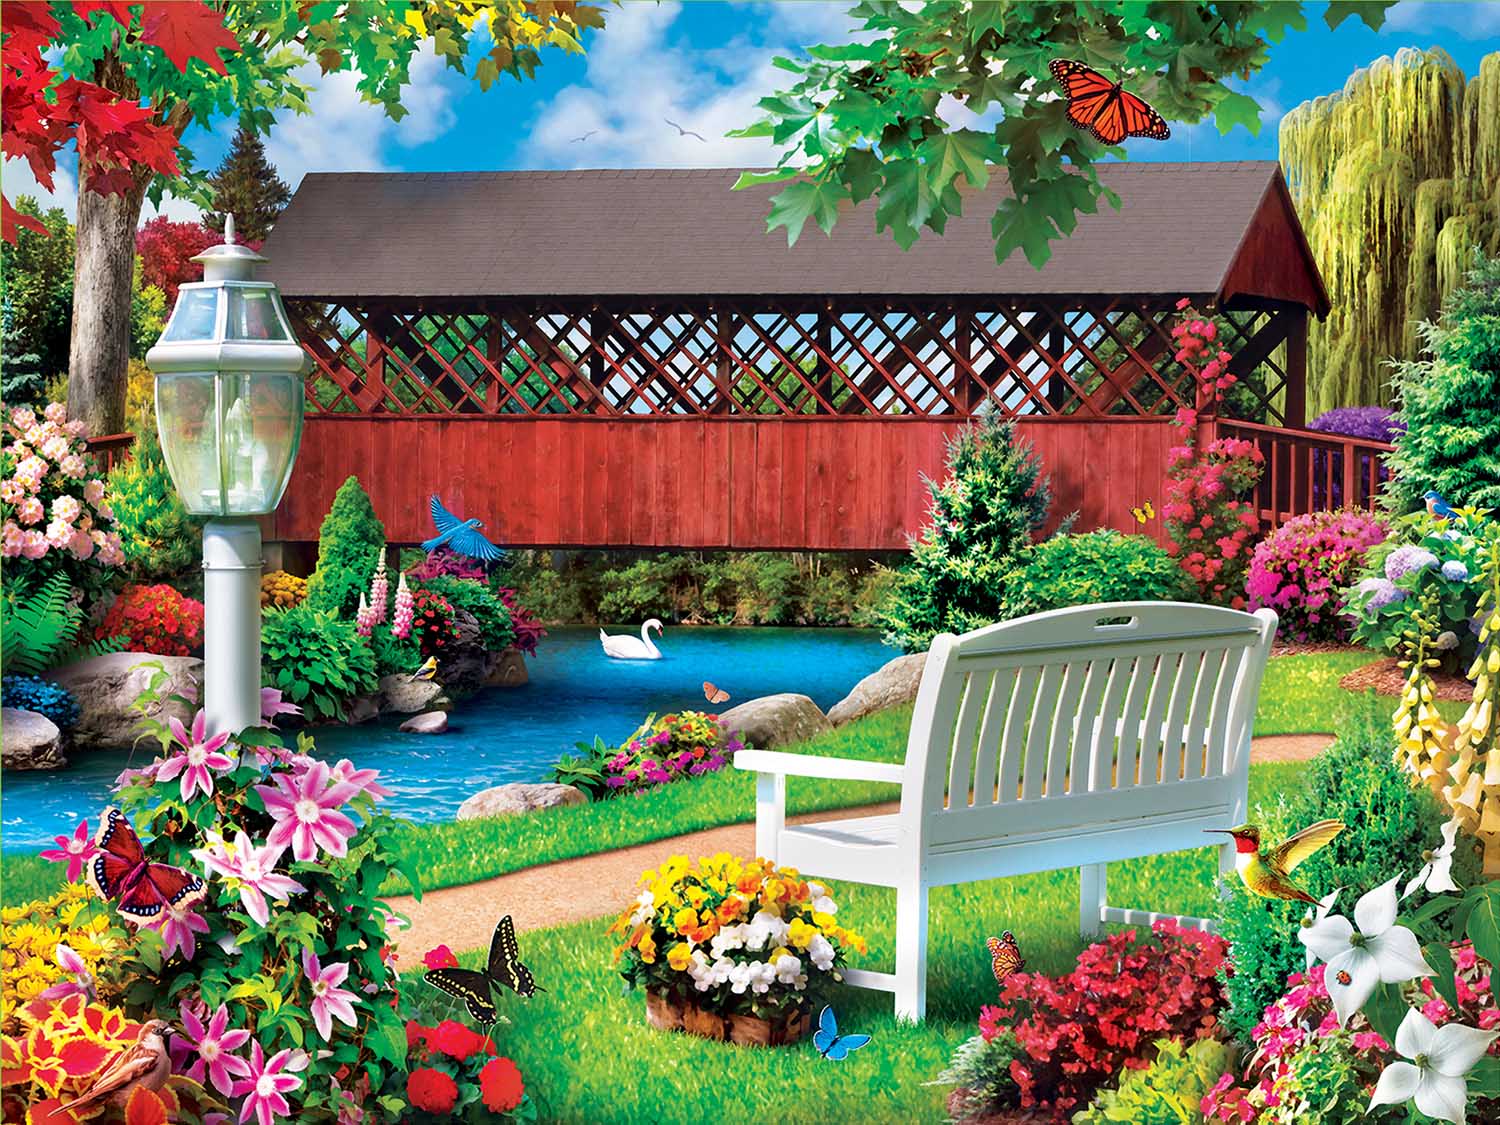 Countryside Park Spring Jigsaw Puzzle